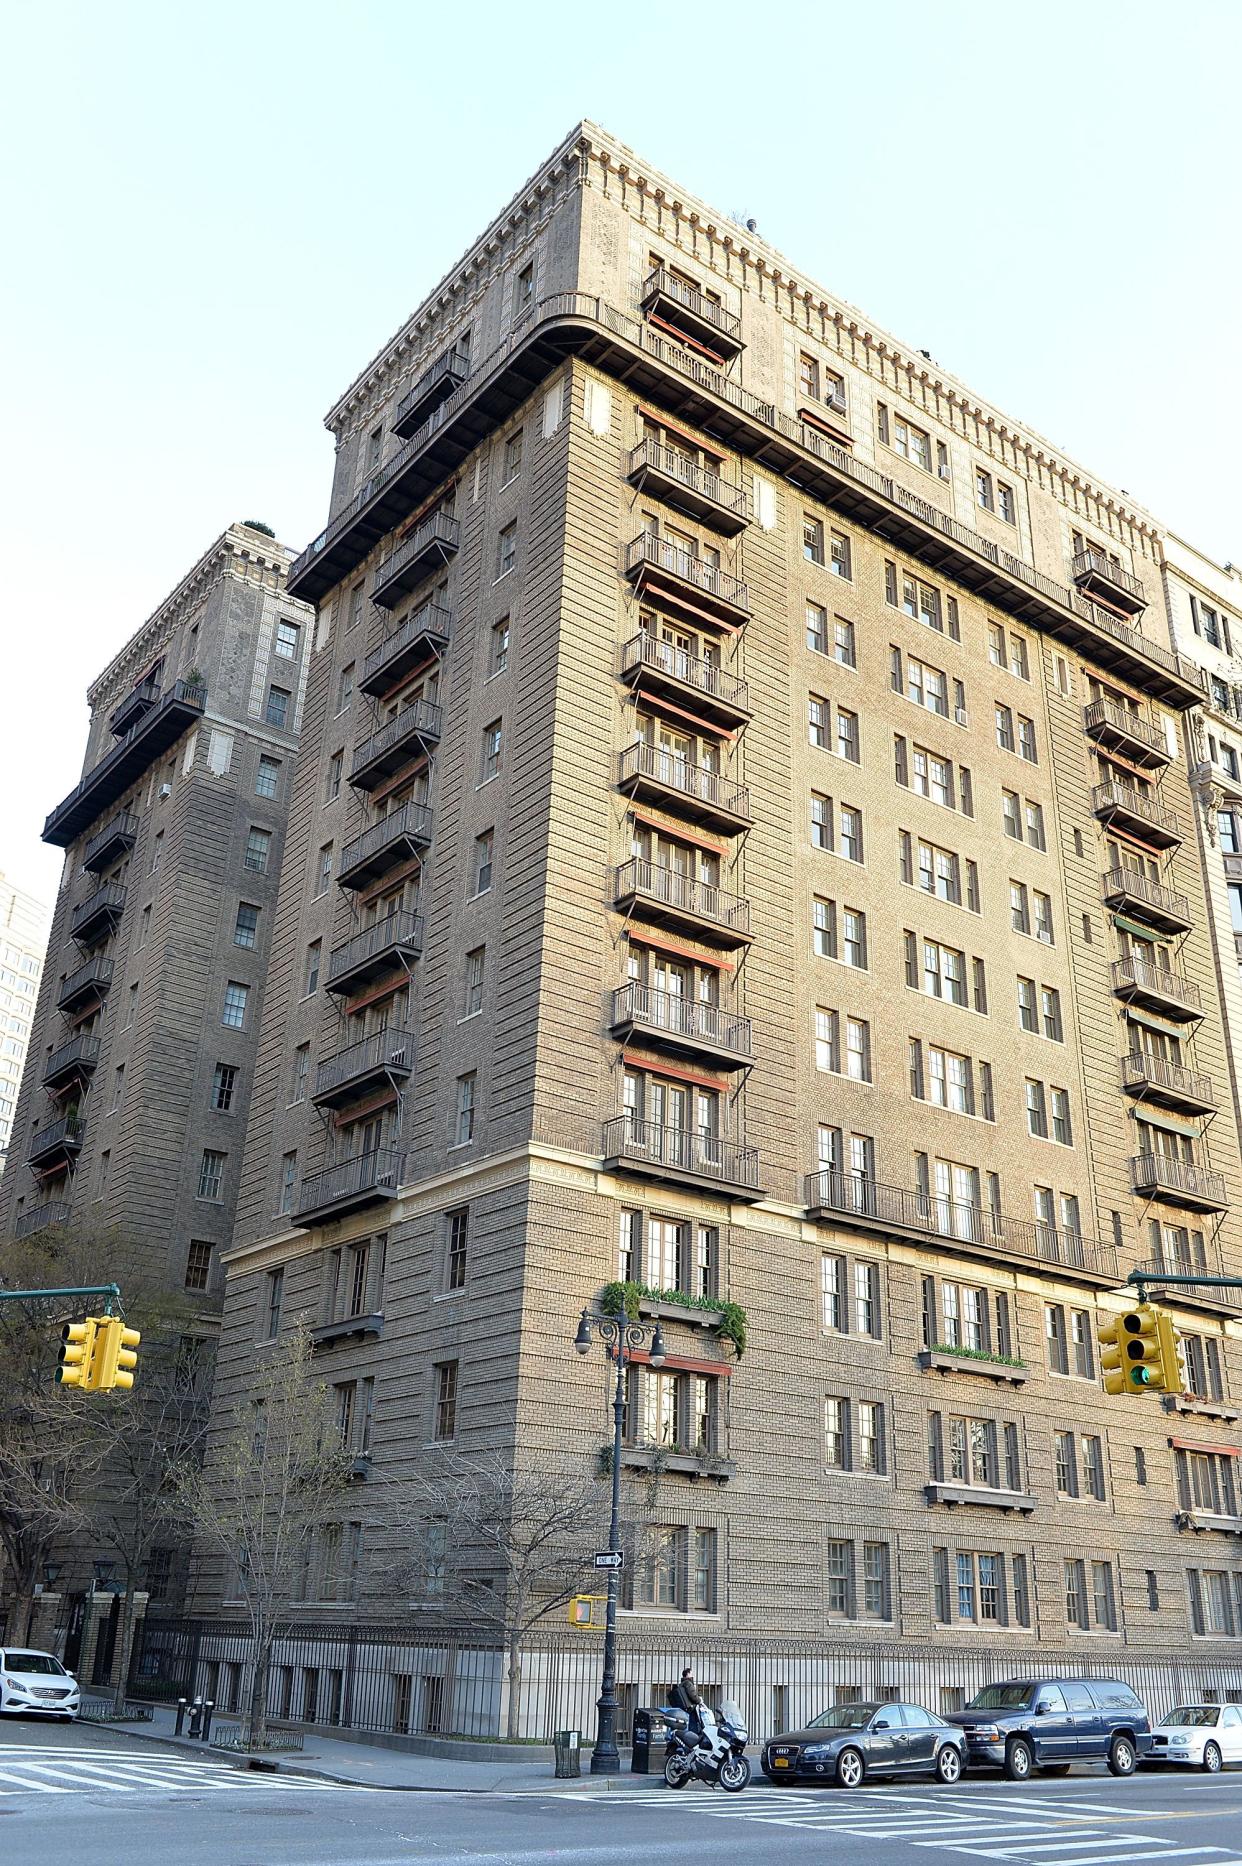 Exterior views of Madonna's New York City apartment building Harperley Hall on April 5, 2016 in New York City.